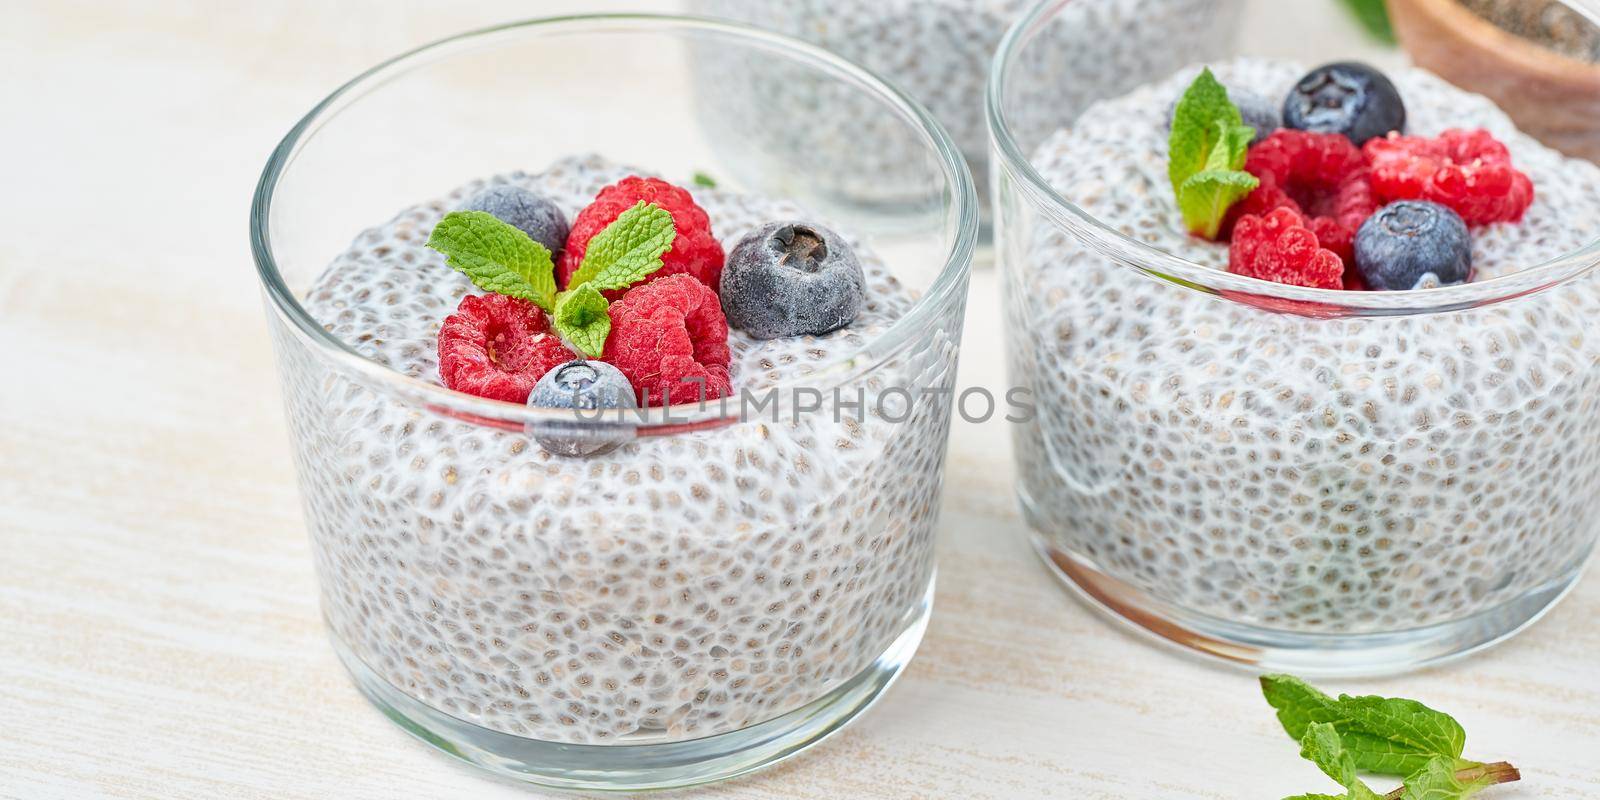 Banner with chia pudding with fresh berries raspberries, blueberries. Three glass, light wooden background, side view, flowers, close up